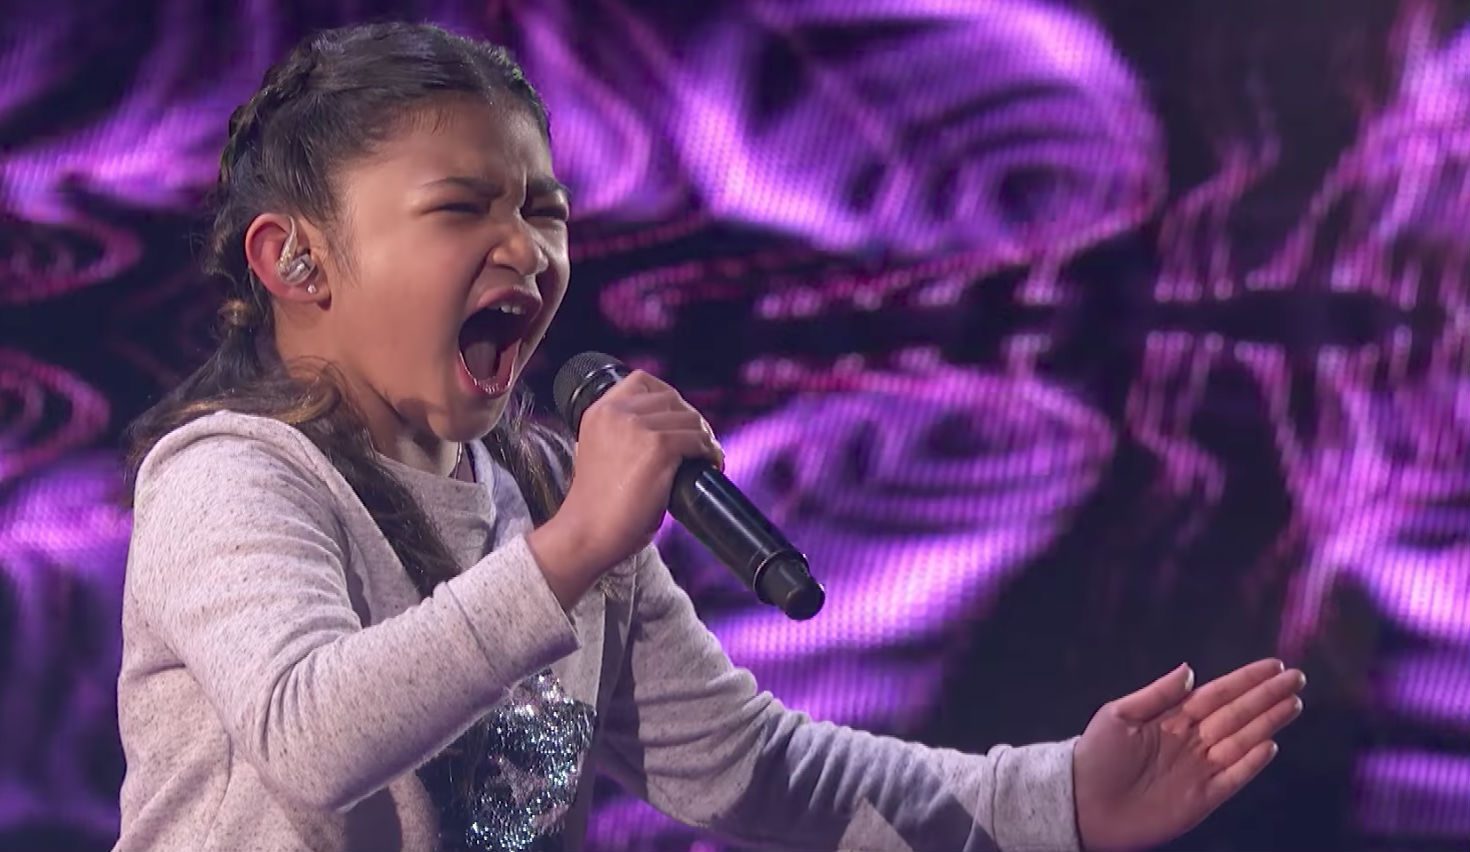 Fil-Am Angelica Hale moves to grand finals of ‘America’s Got Talent’